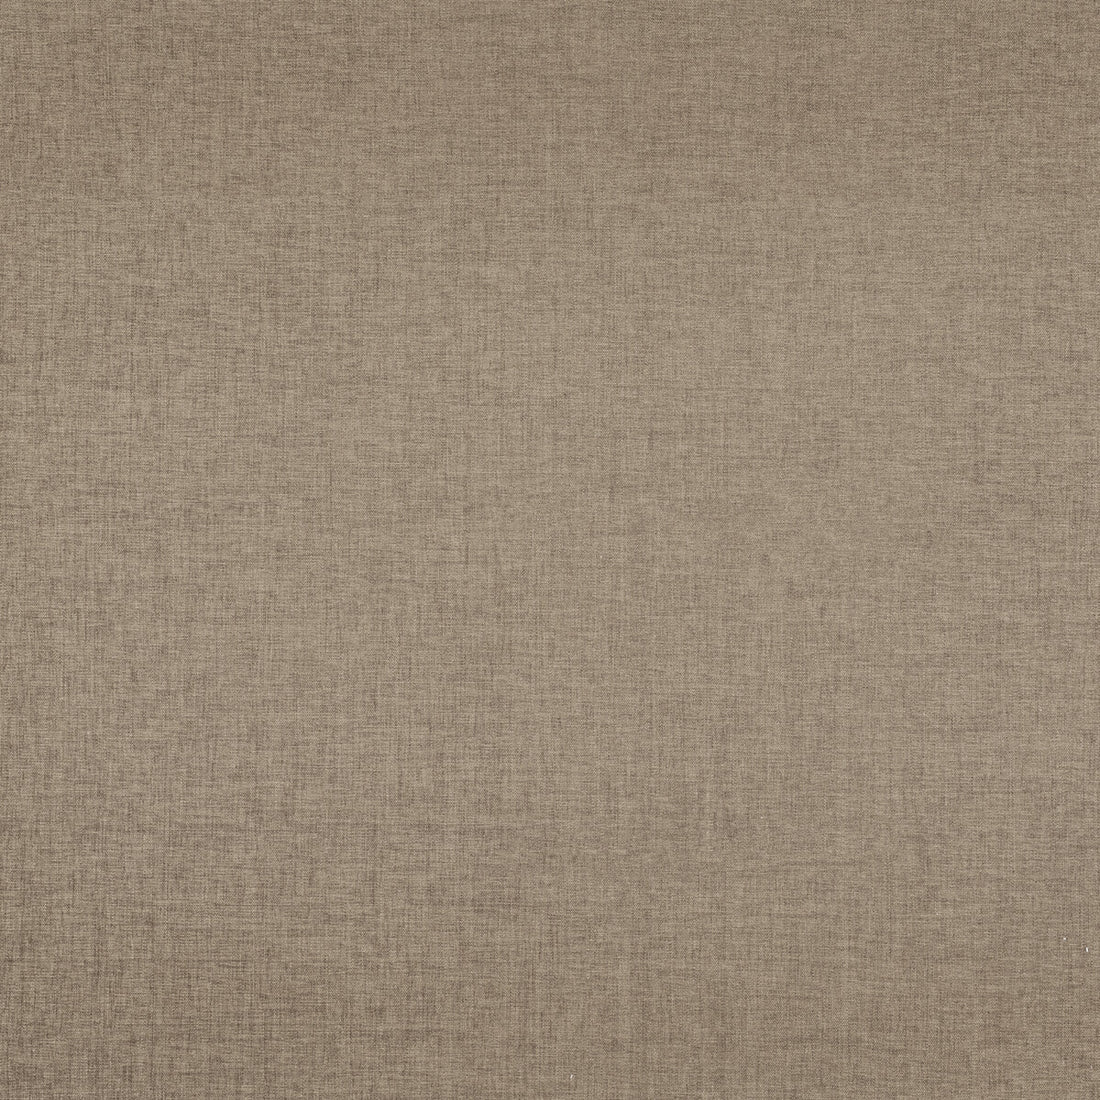 Kravet Smart fabric in 36095-1161 color - pattern 36095.1161.0 - by Kravet Smart in the Eco-Friendly Chenille collection